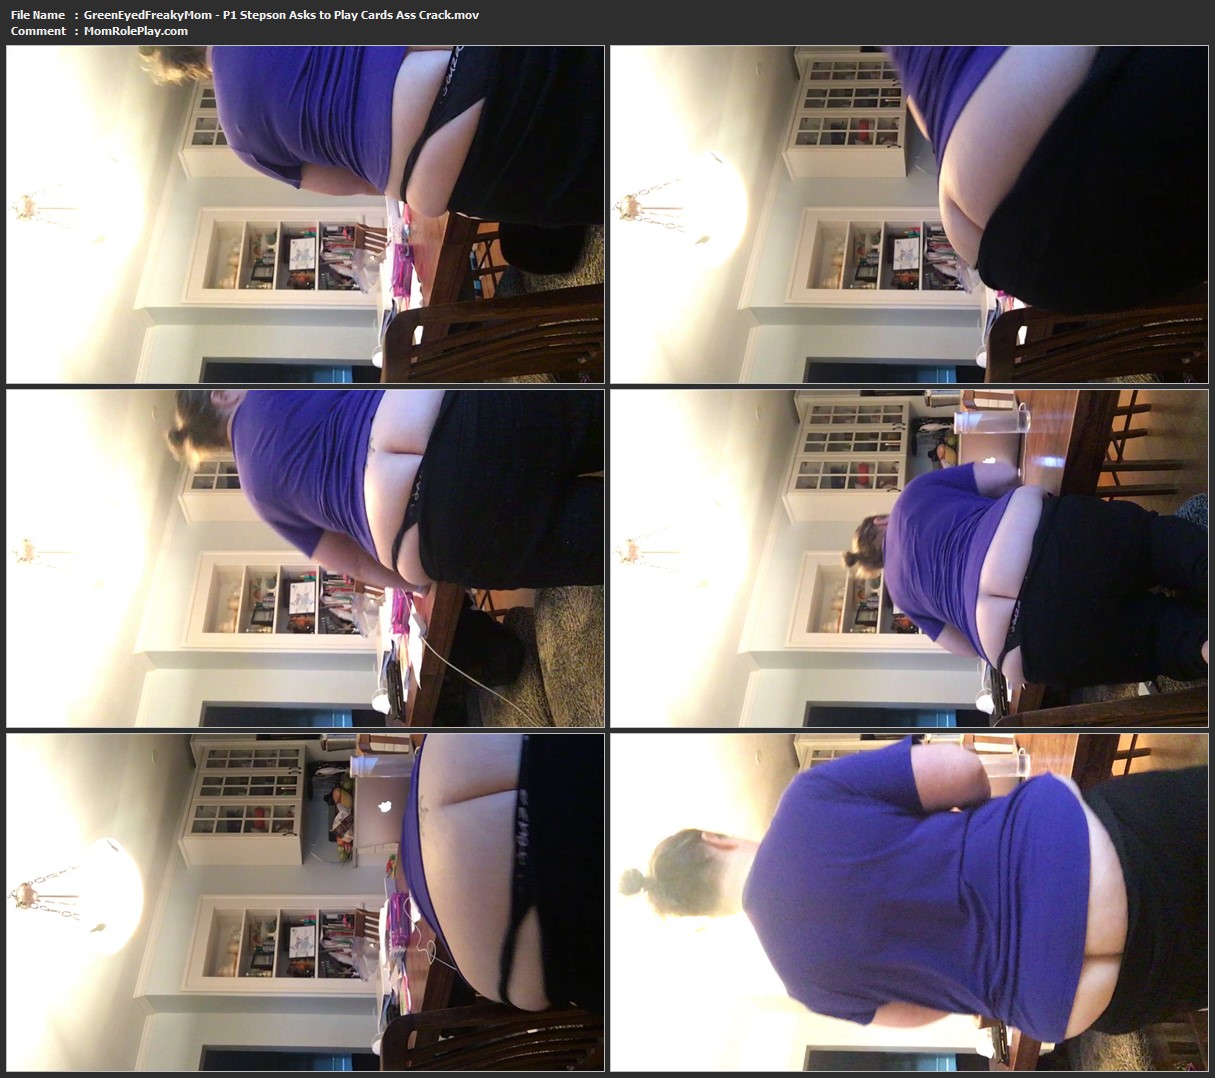 GreenEyedFreakyMom - P1 Stepson Asks to Play Cards Ass Crack